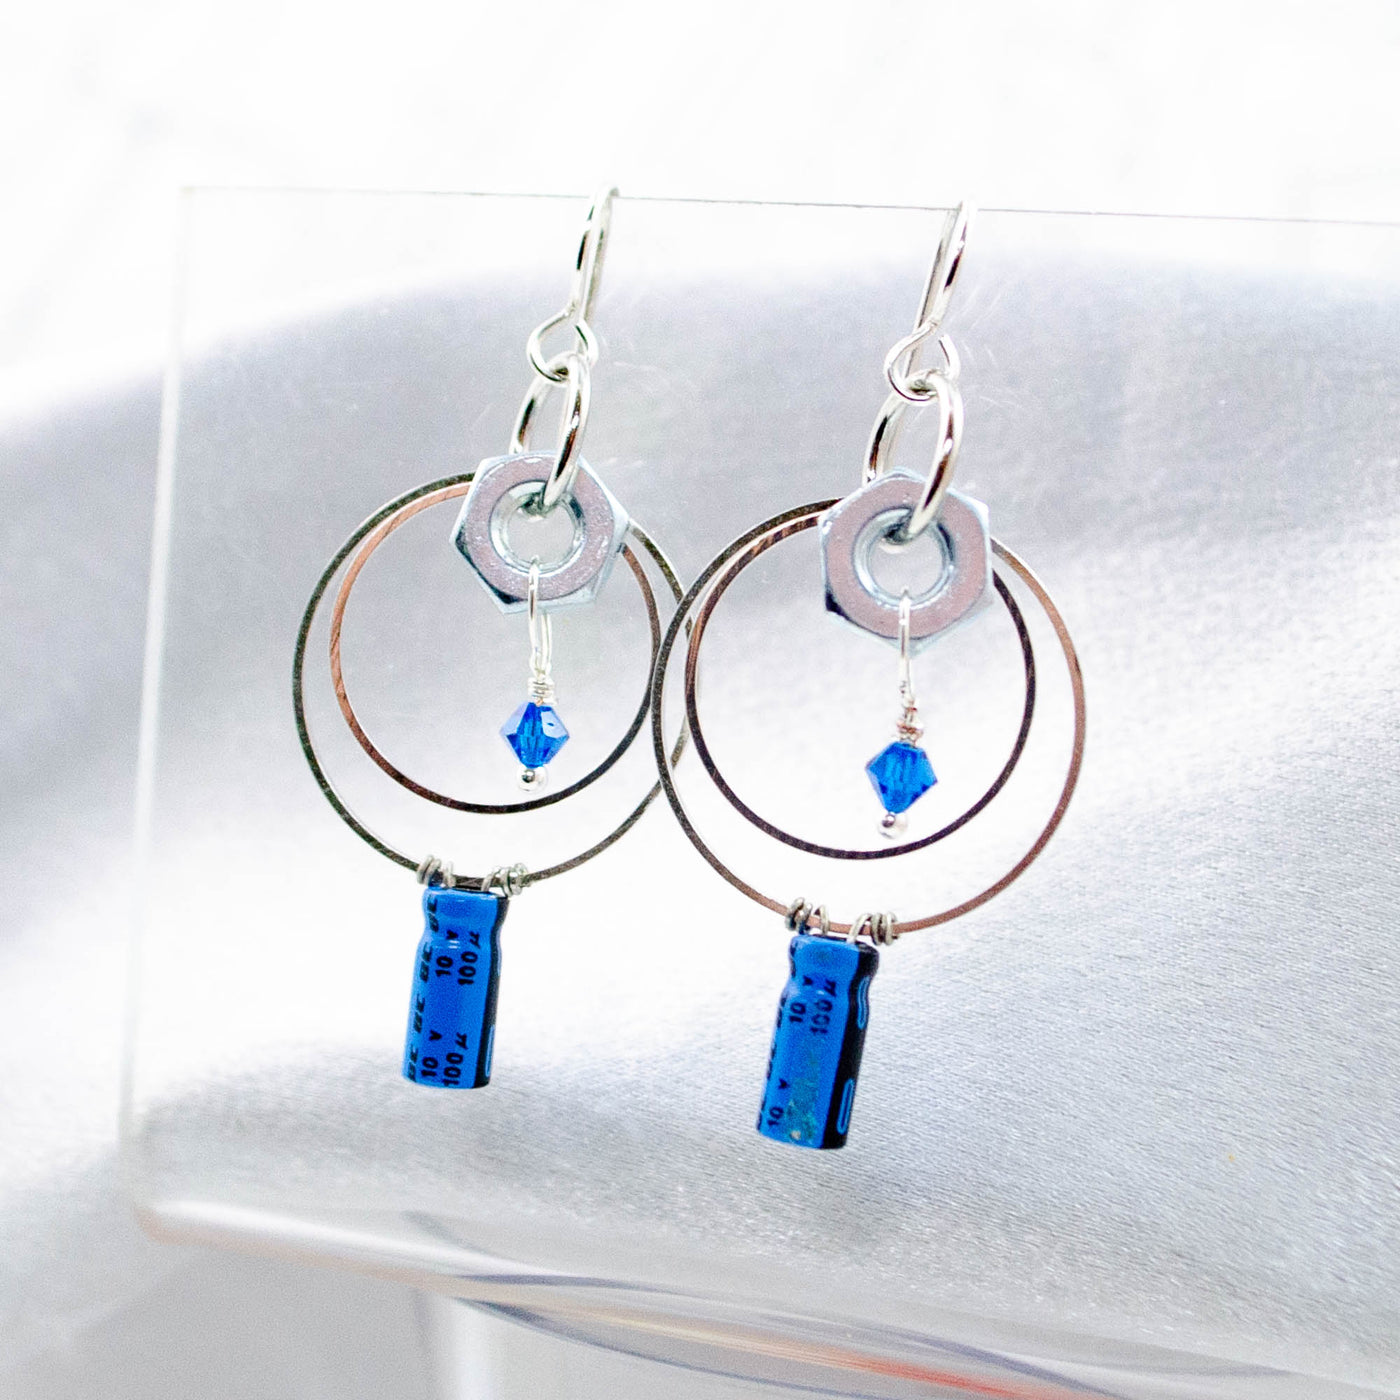 Electronic Component Earrings - Capacitors